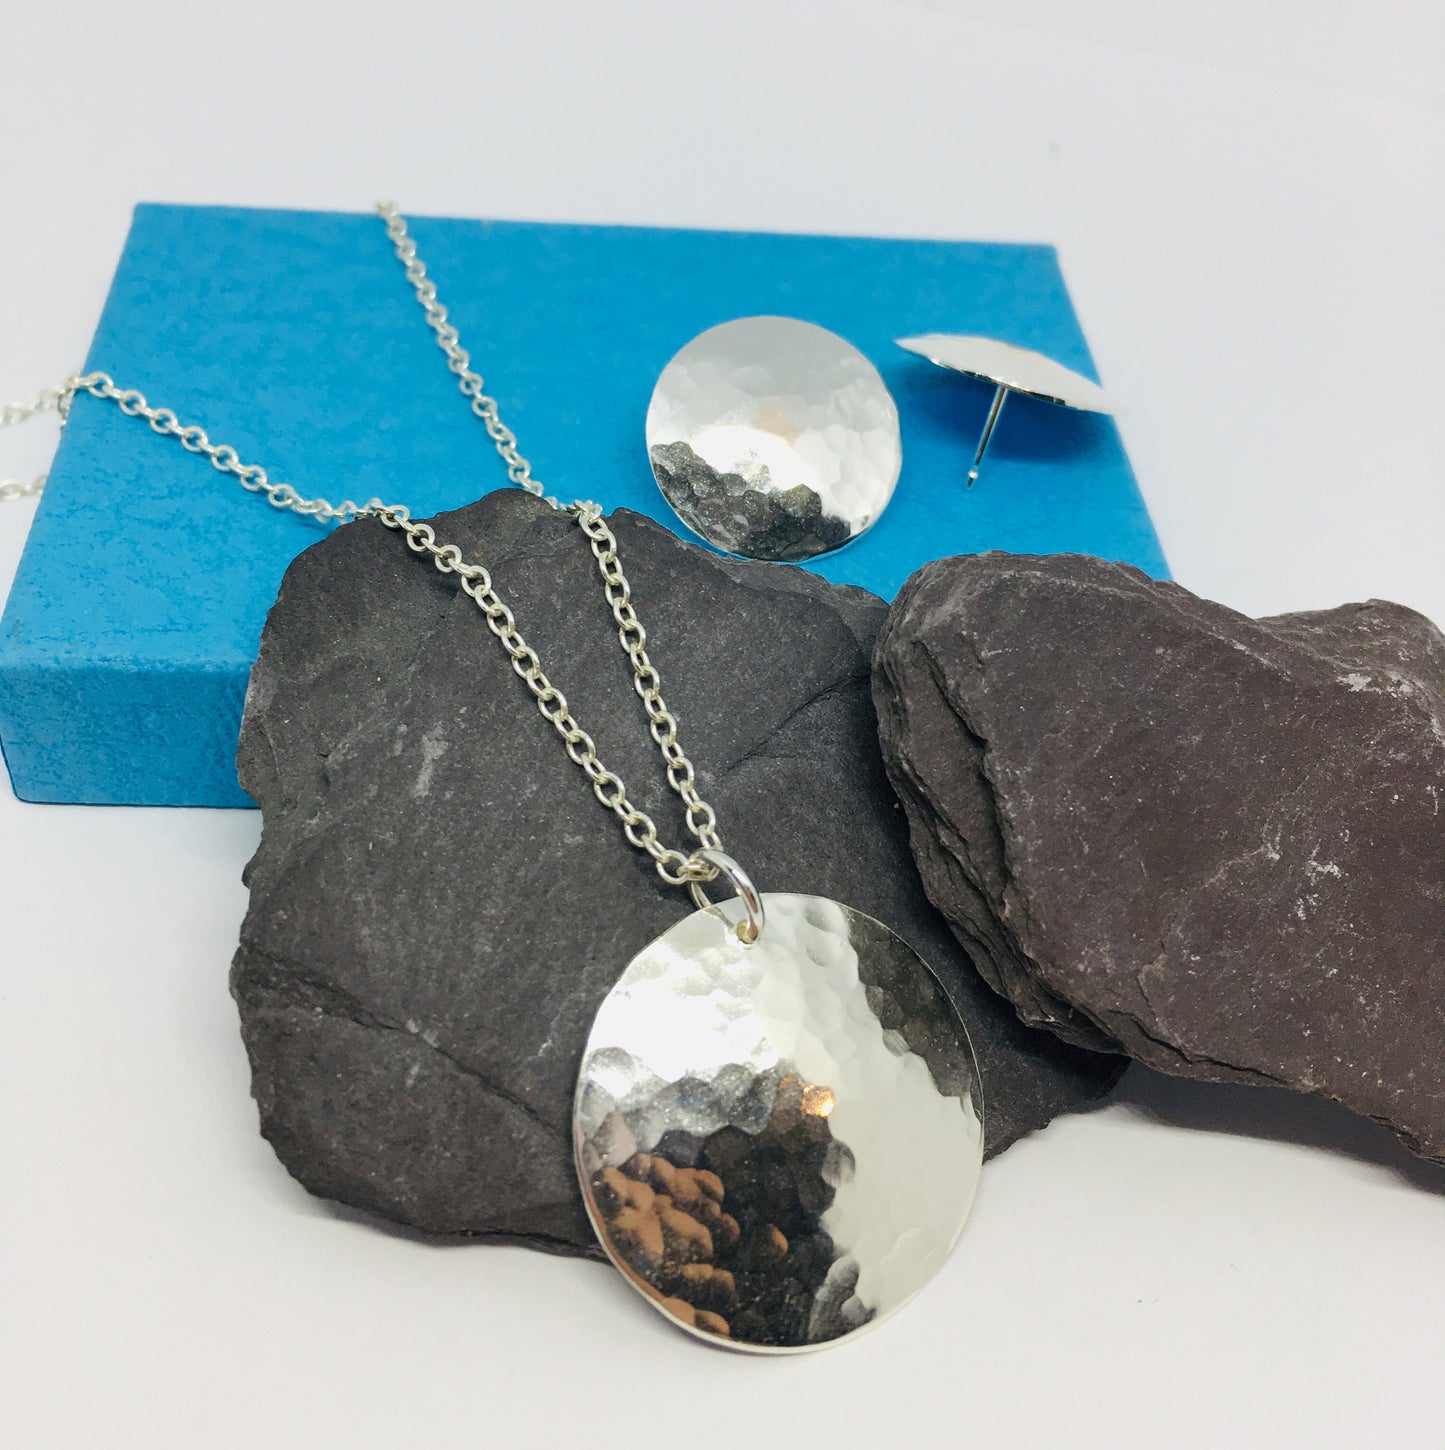 Sterling silver disc jewellery set